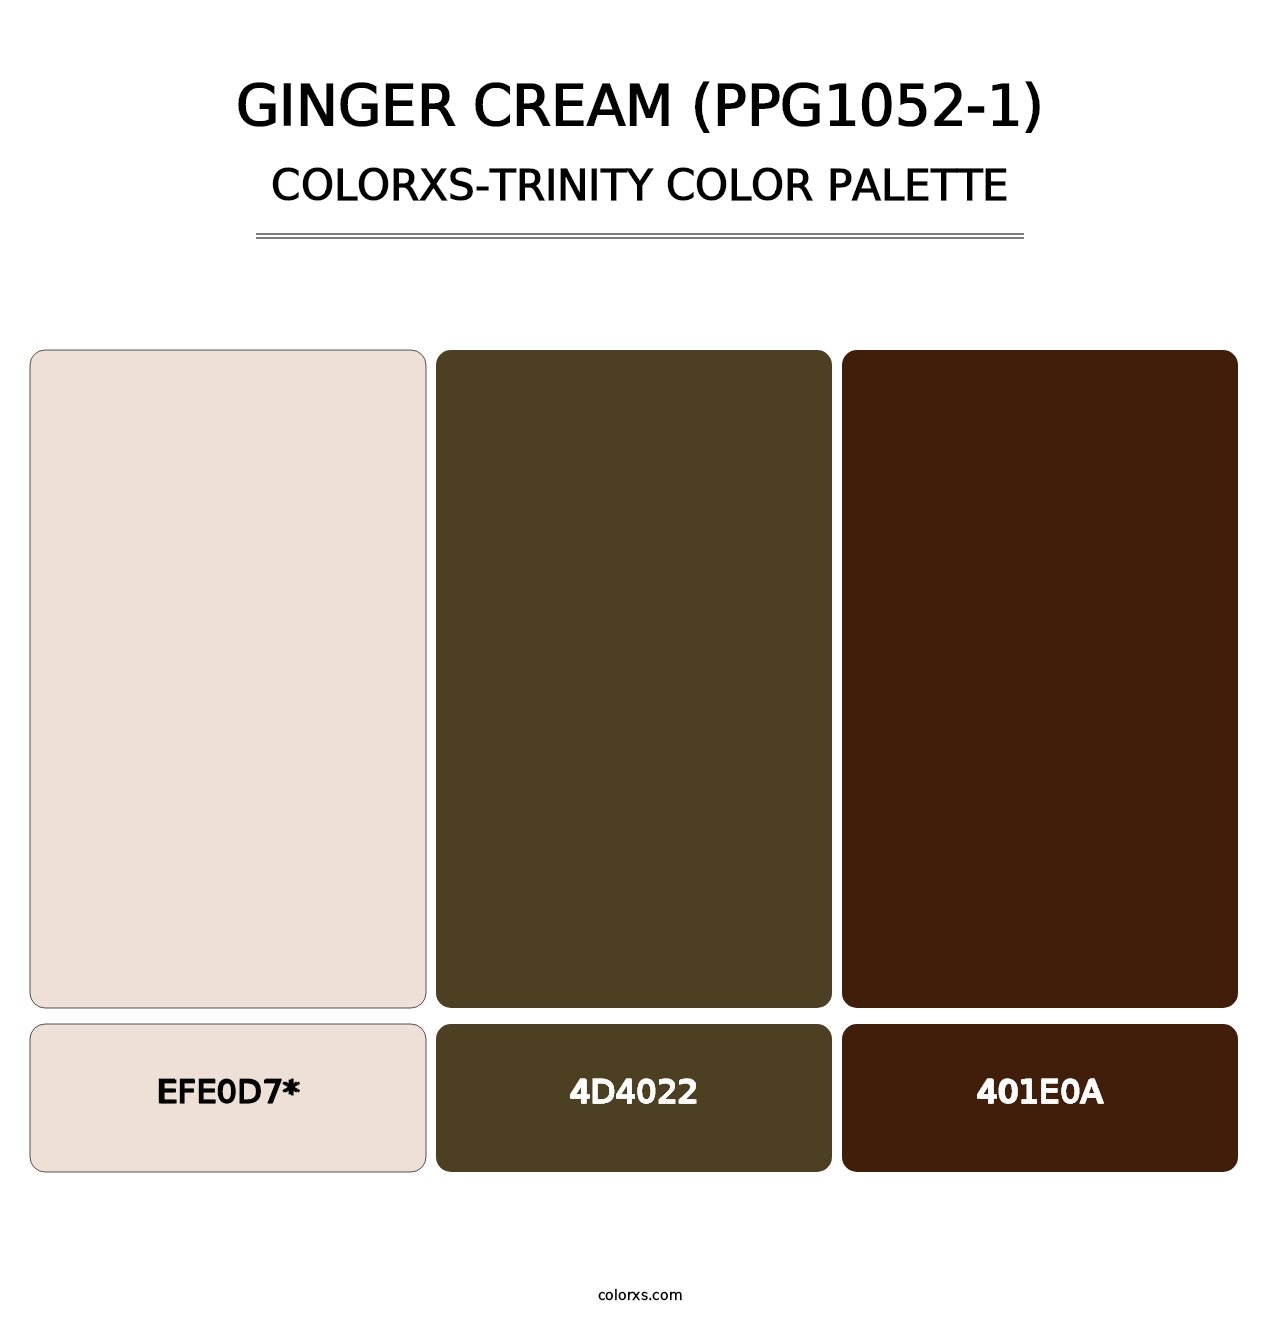 Ginger Cream (PPG1052-1) - Colorxs Trinity Palette